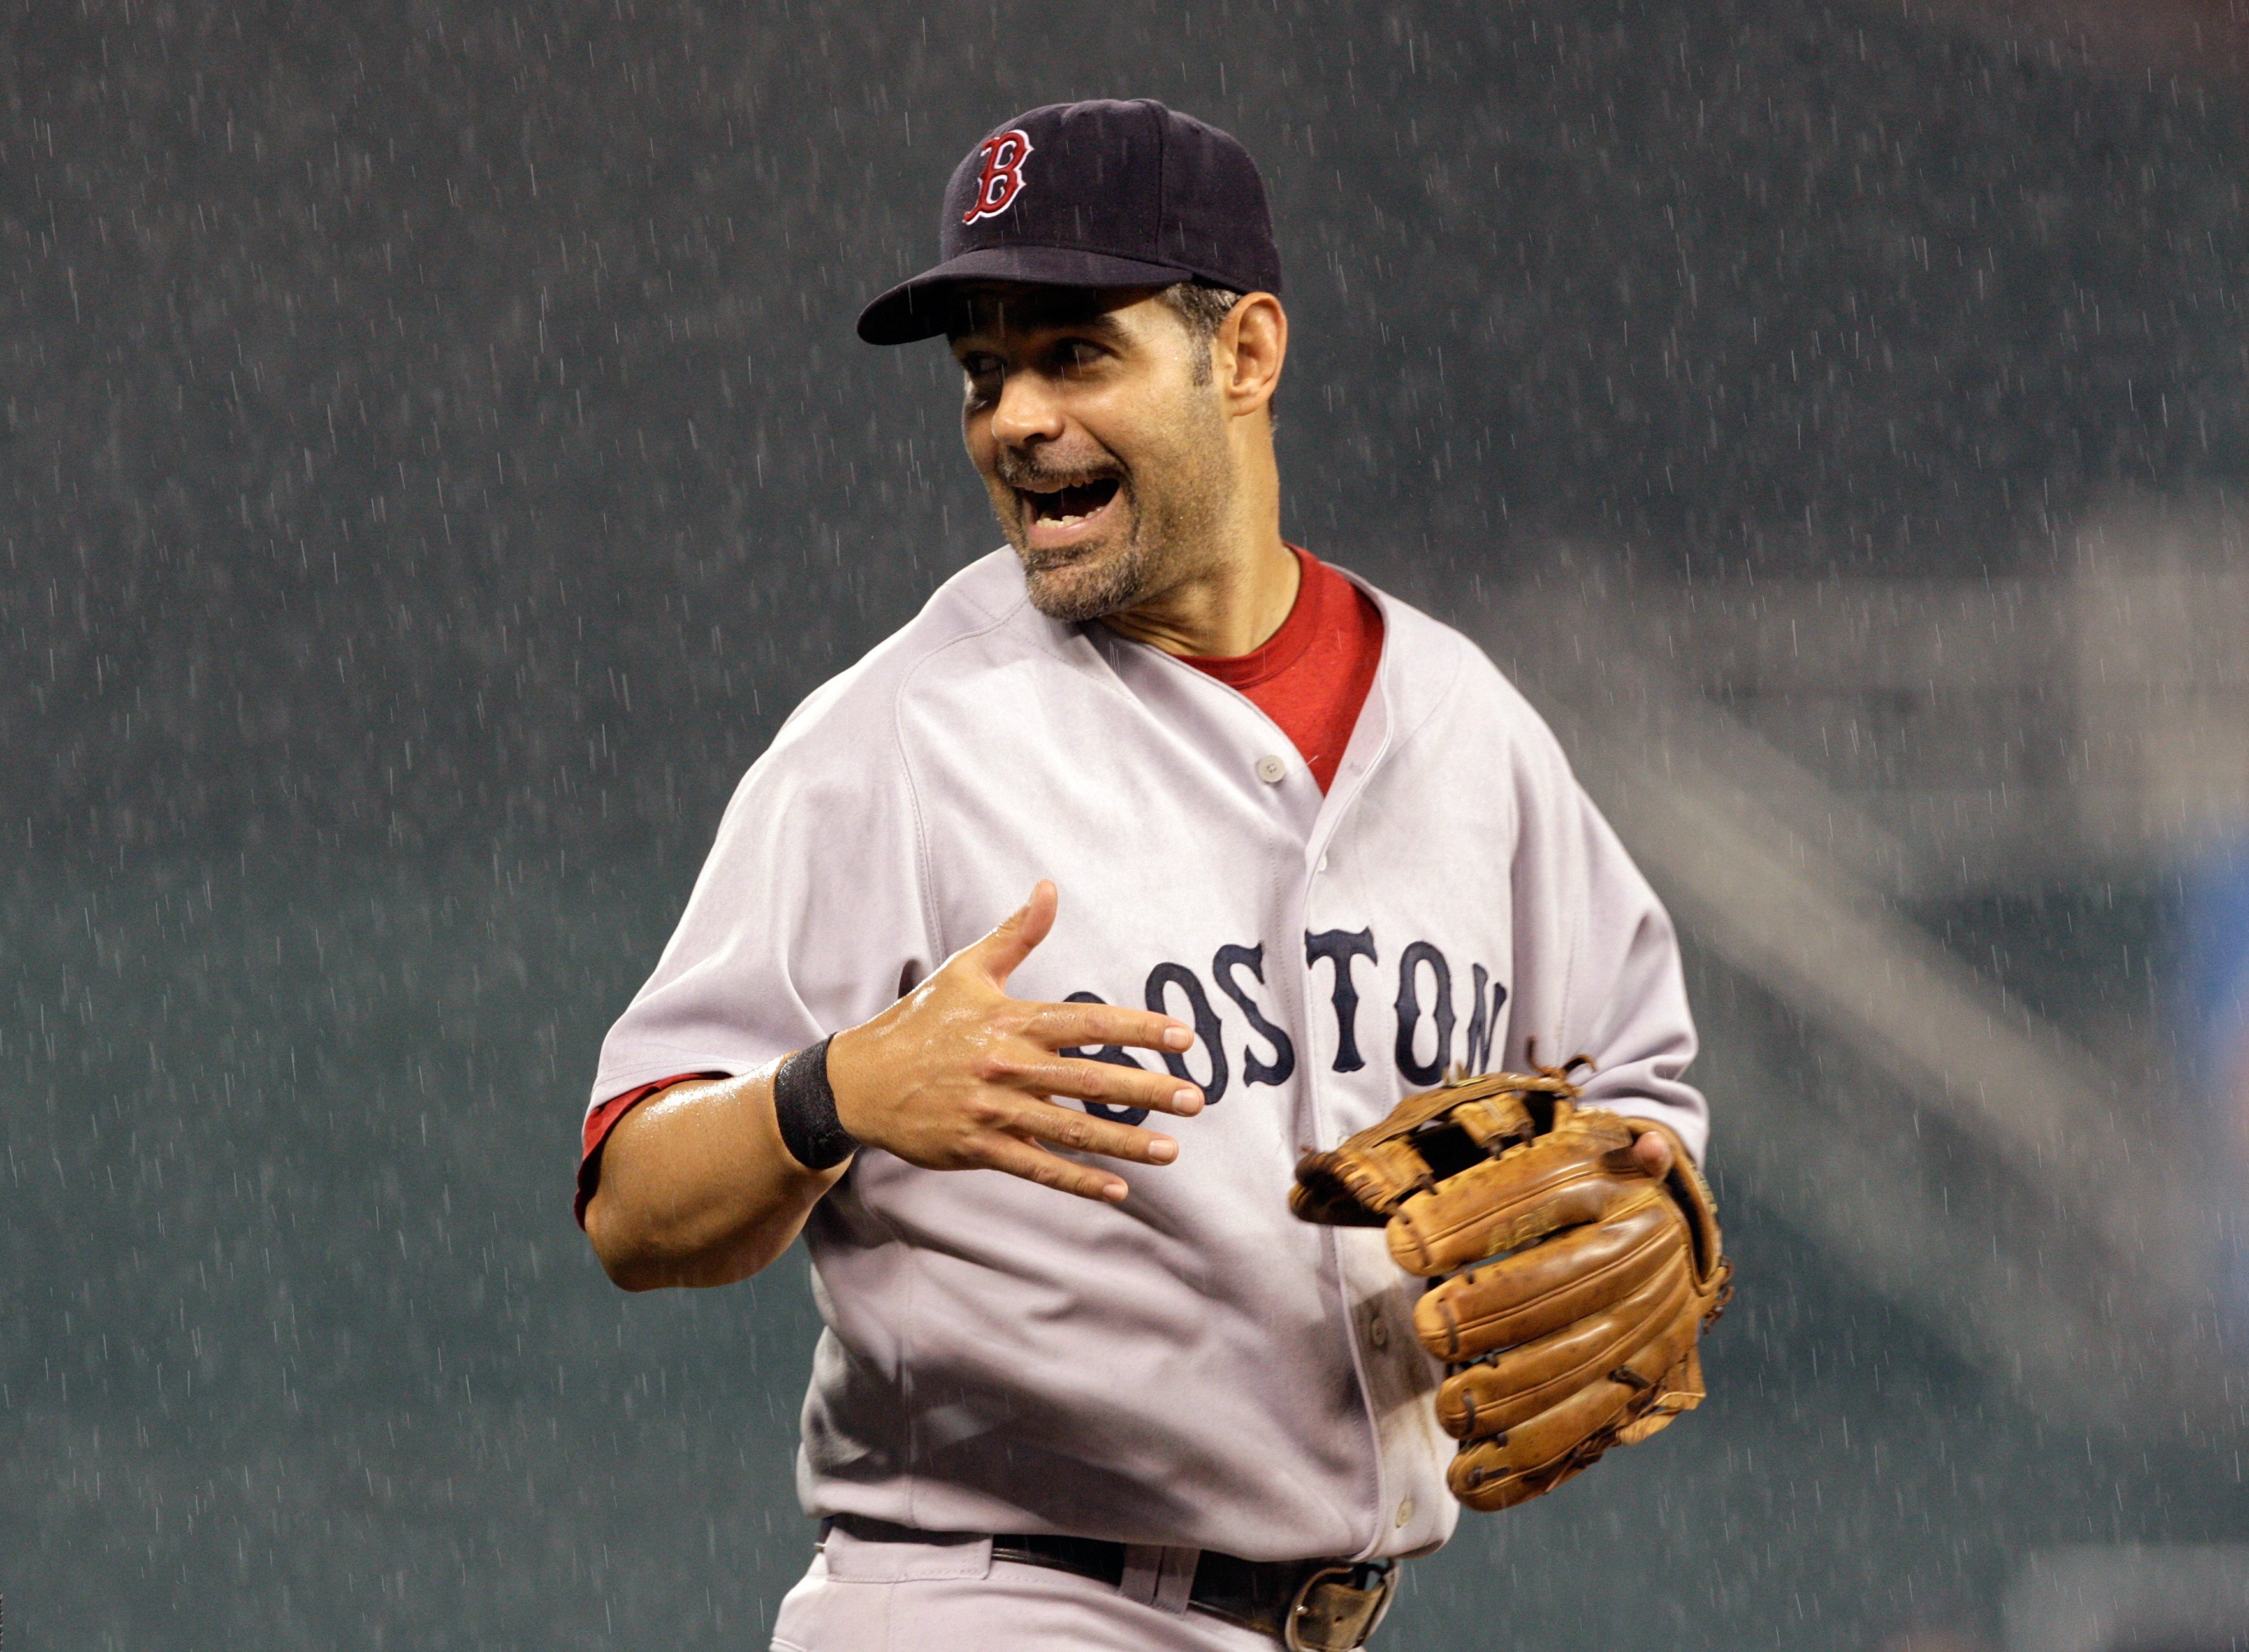 Mike Lowell and the Boston Red Sox - Bearport Publishing